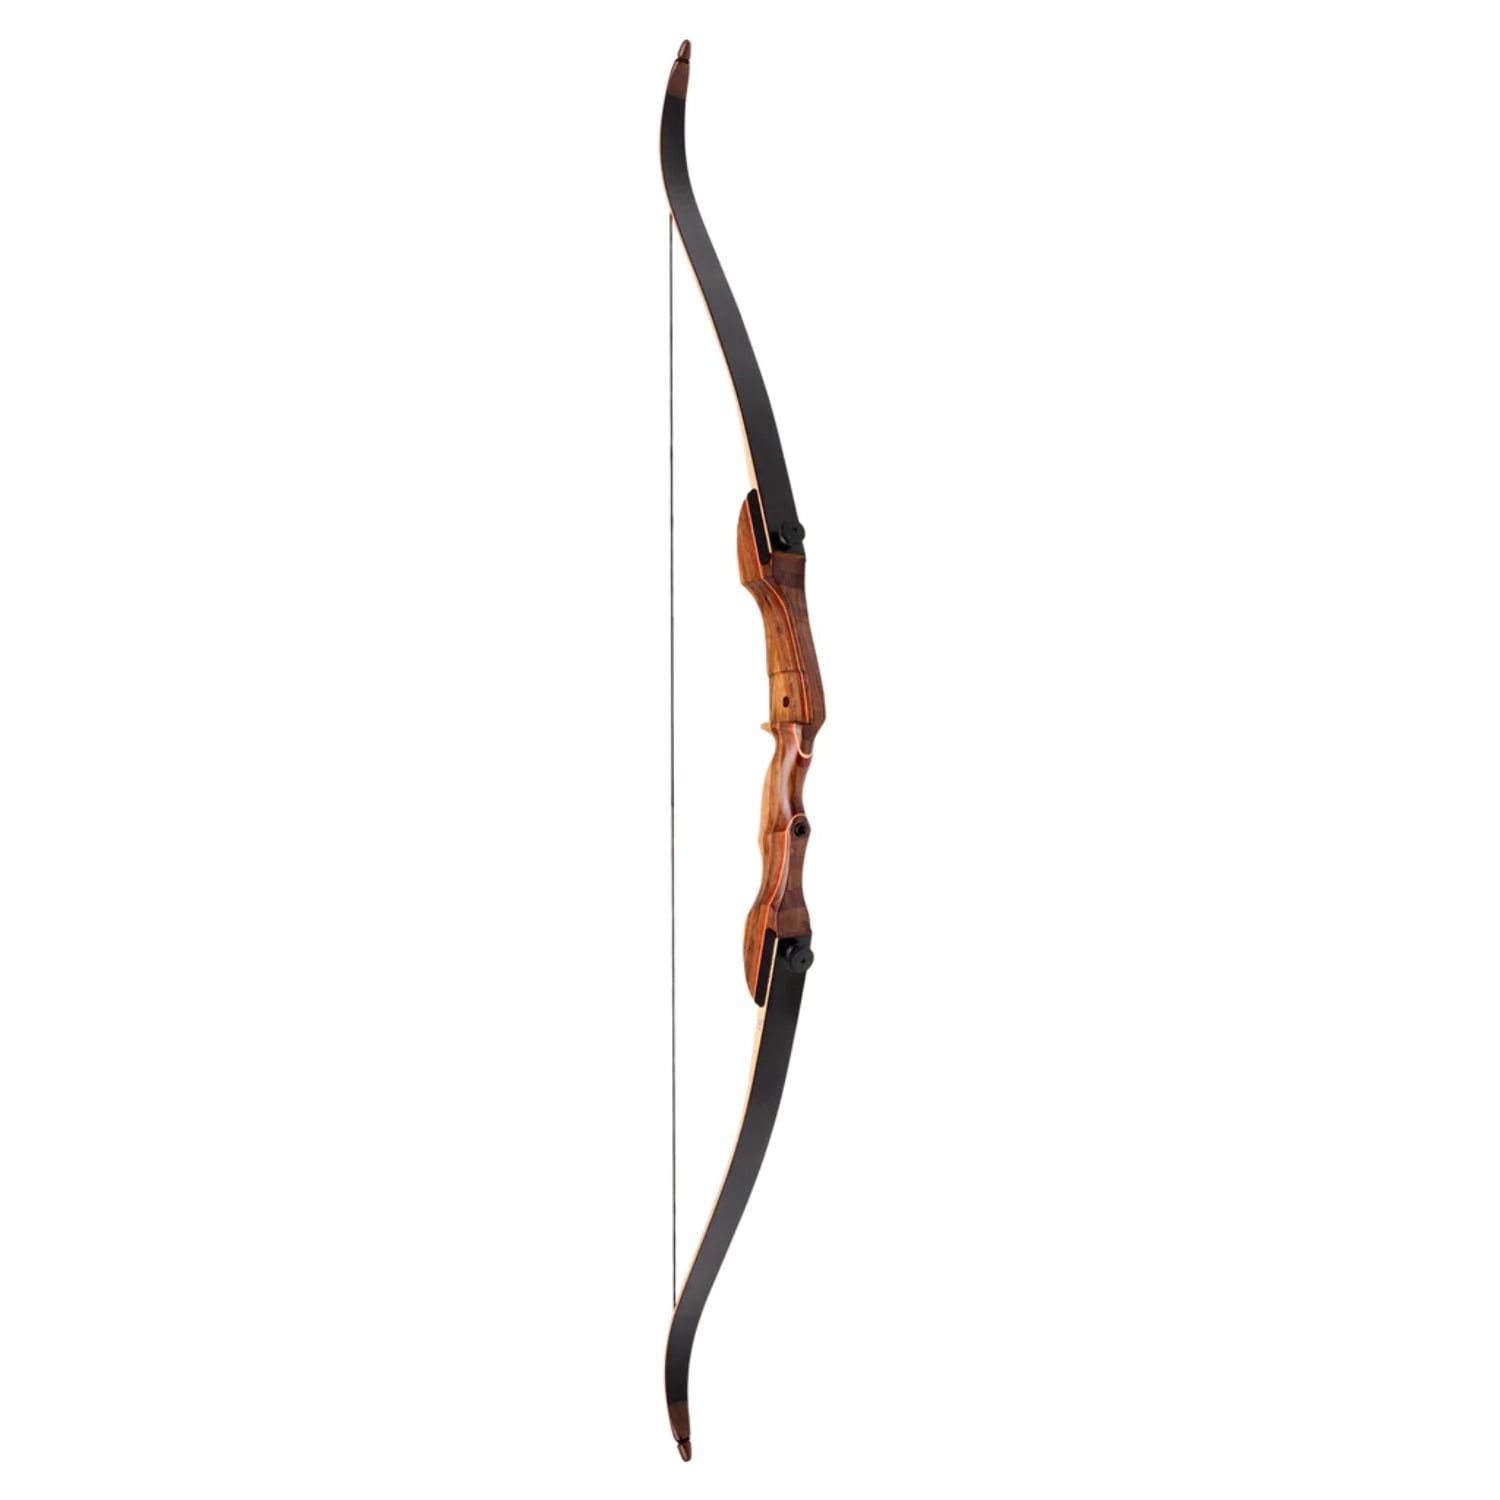 Mountaineer 2.0 Recurve Bow by October Mountain Products, 62 Model 